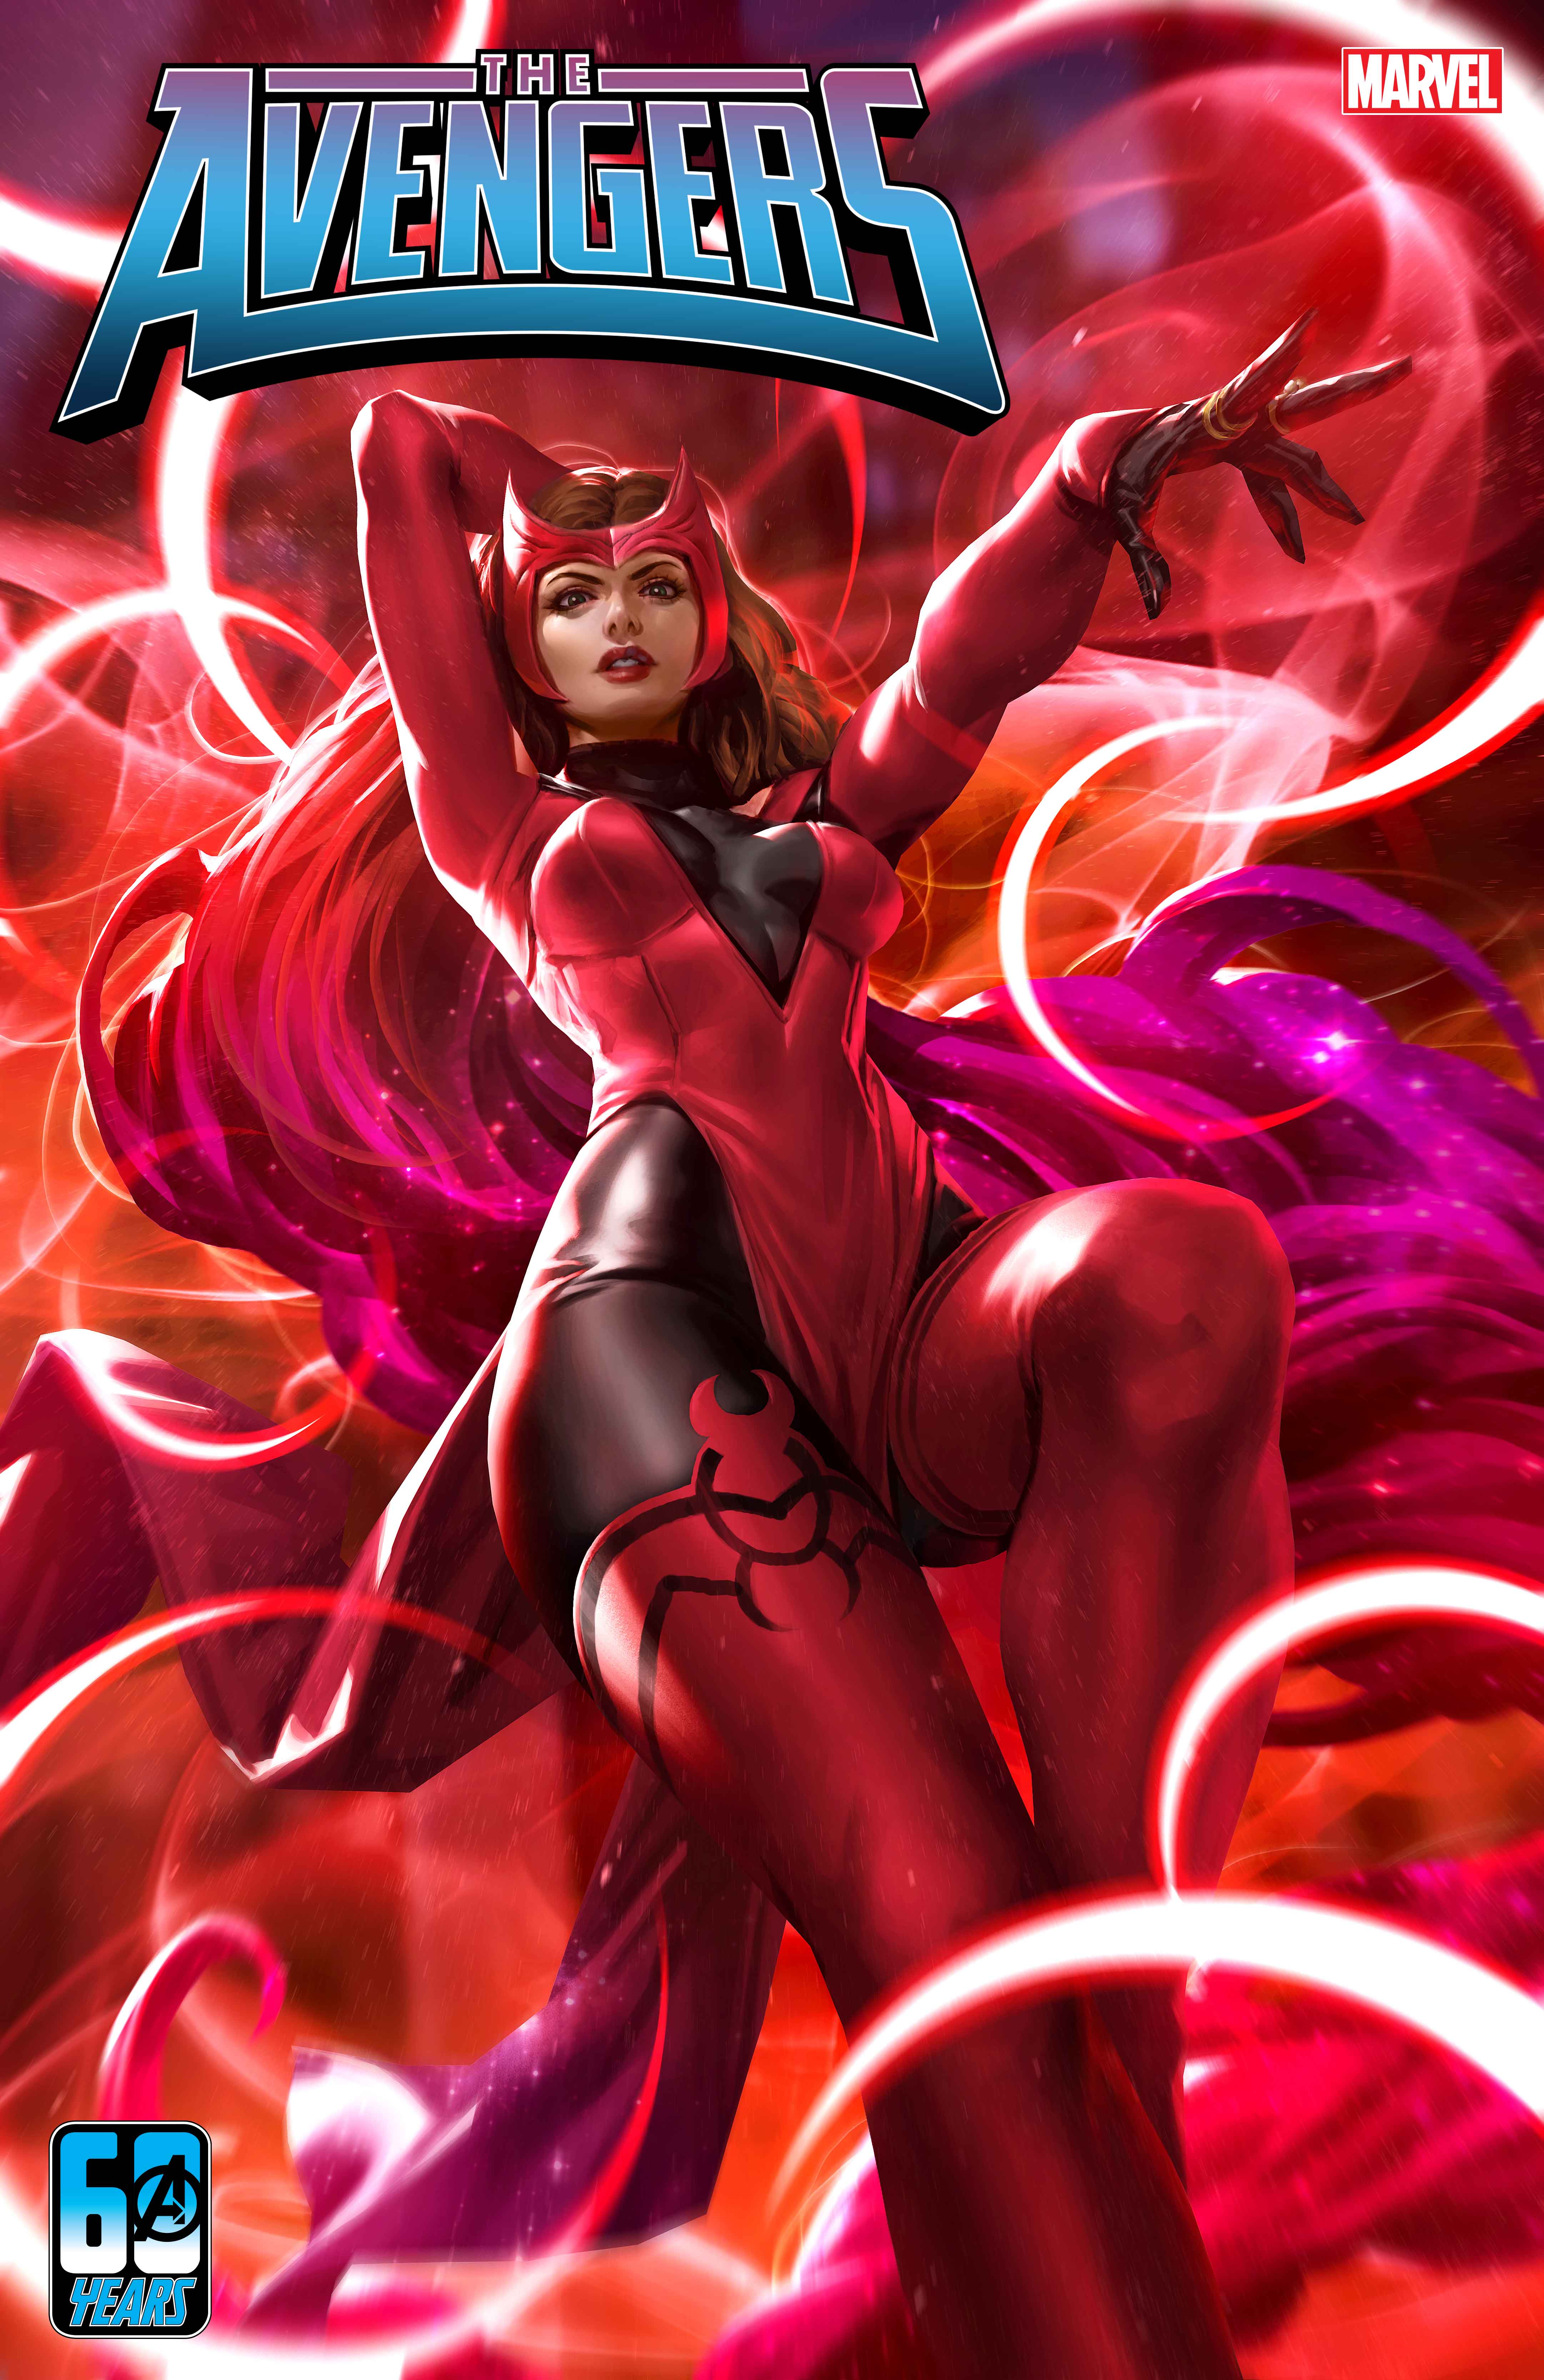 Illustrated cover of the Avengers featuring the Scarlet Witch